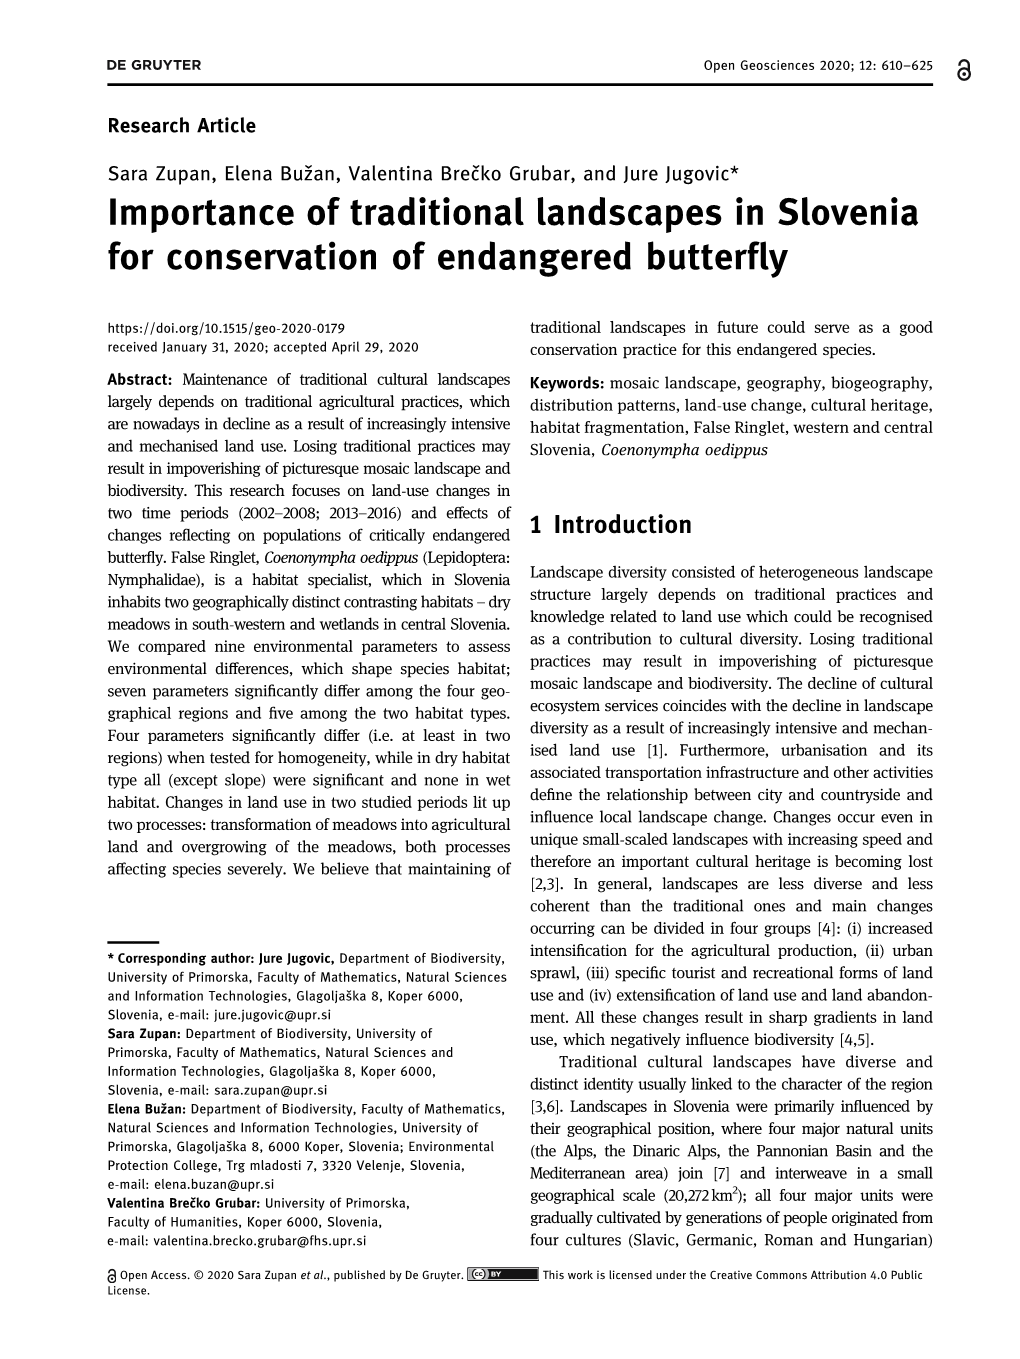 Importance of Traditional Landscapes in Slovenia for Conservation of Endangered Butterﬂy